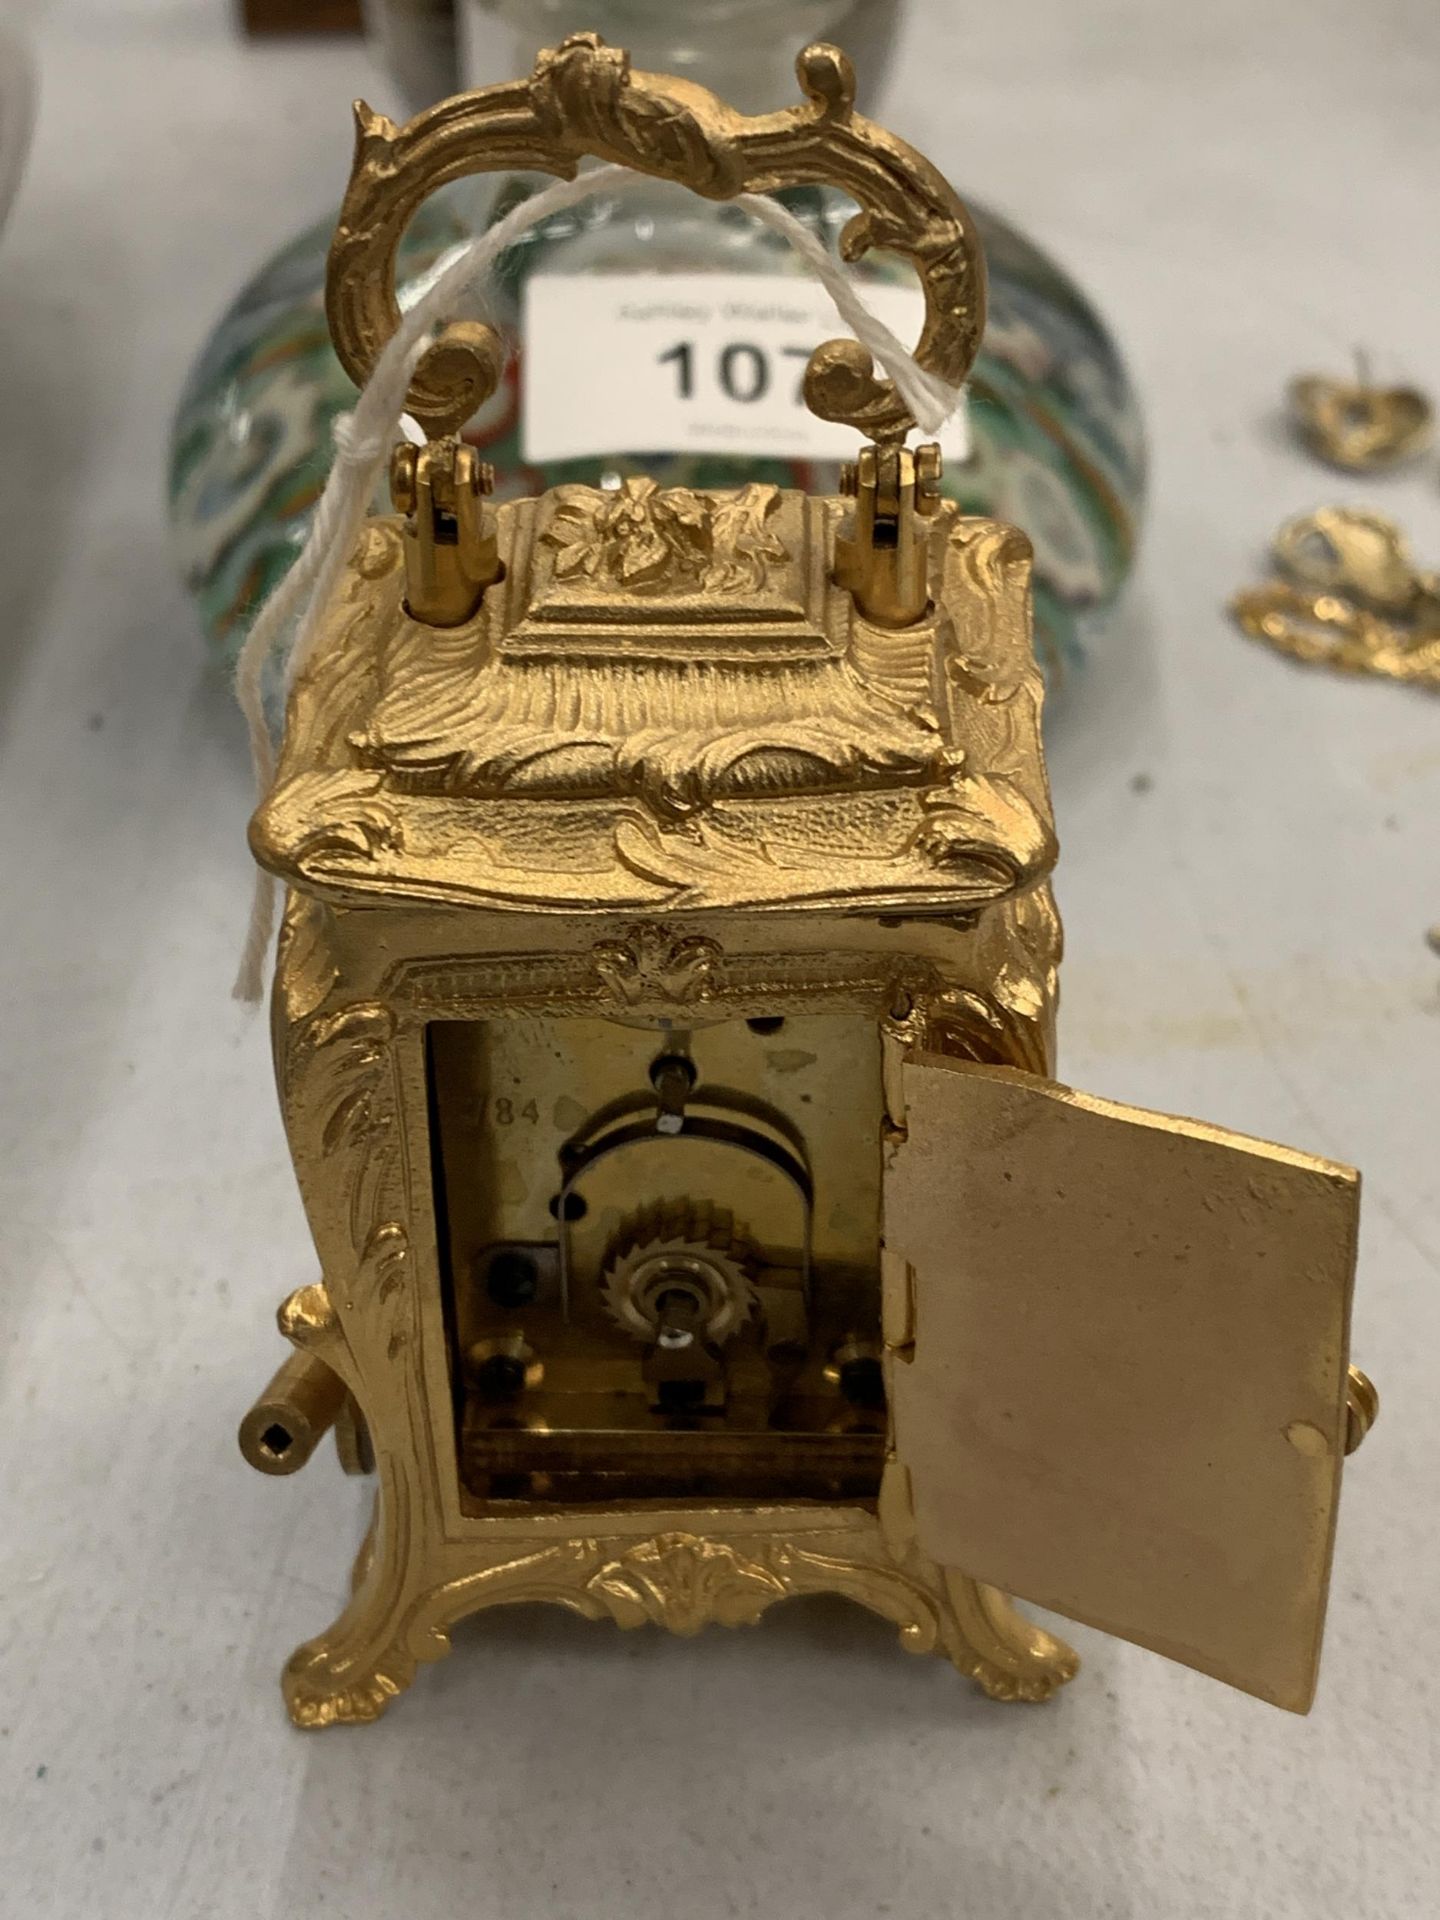 A MINIATURE GILDED FRENCH CLOCK WITH KEY HEIGHT 3.5" SEEN WORKING BUT NO WARRANTY - Image 3 of 3